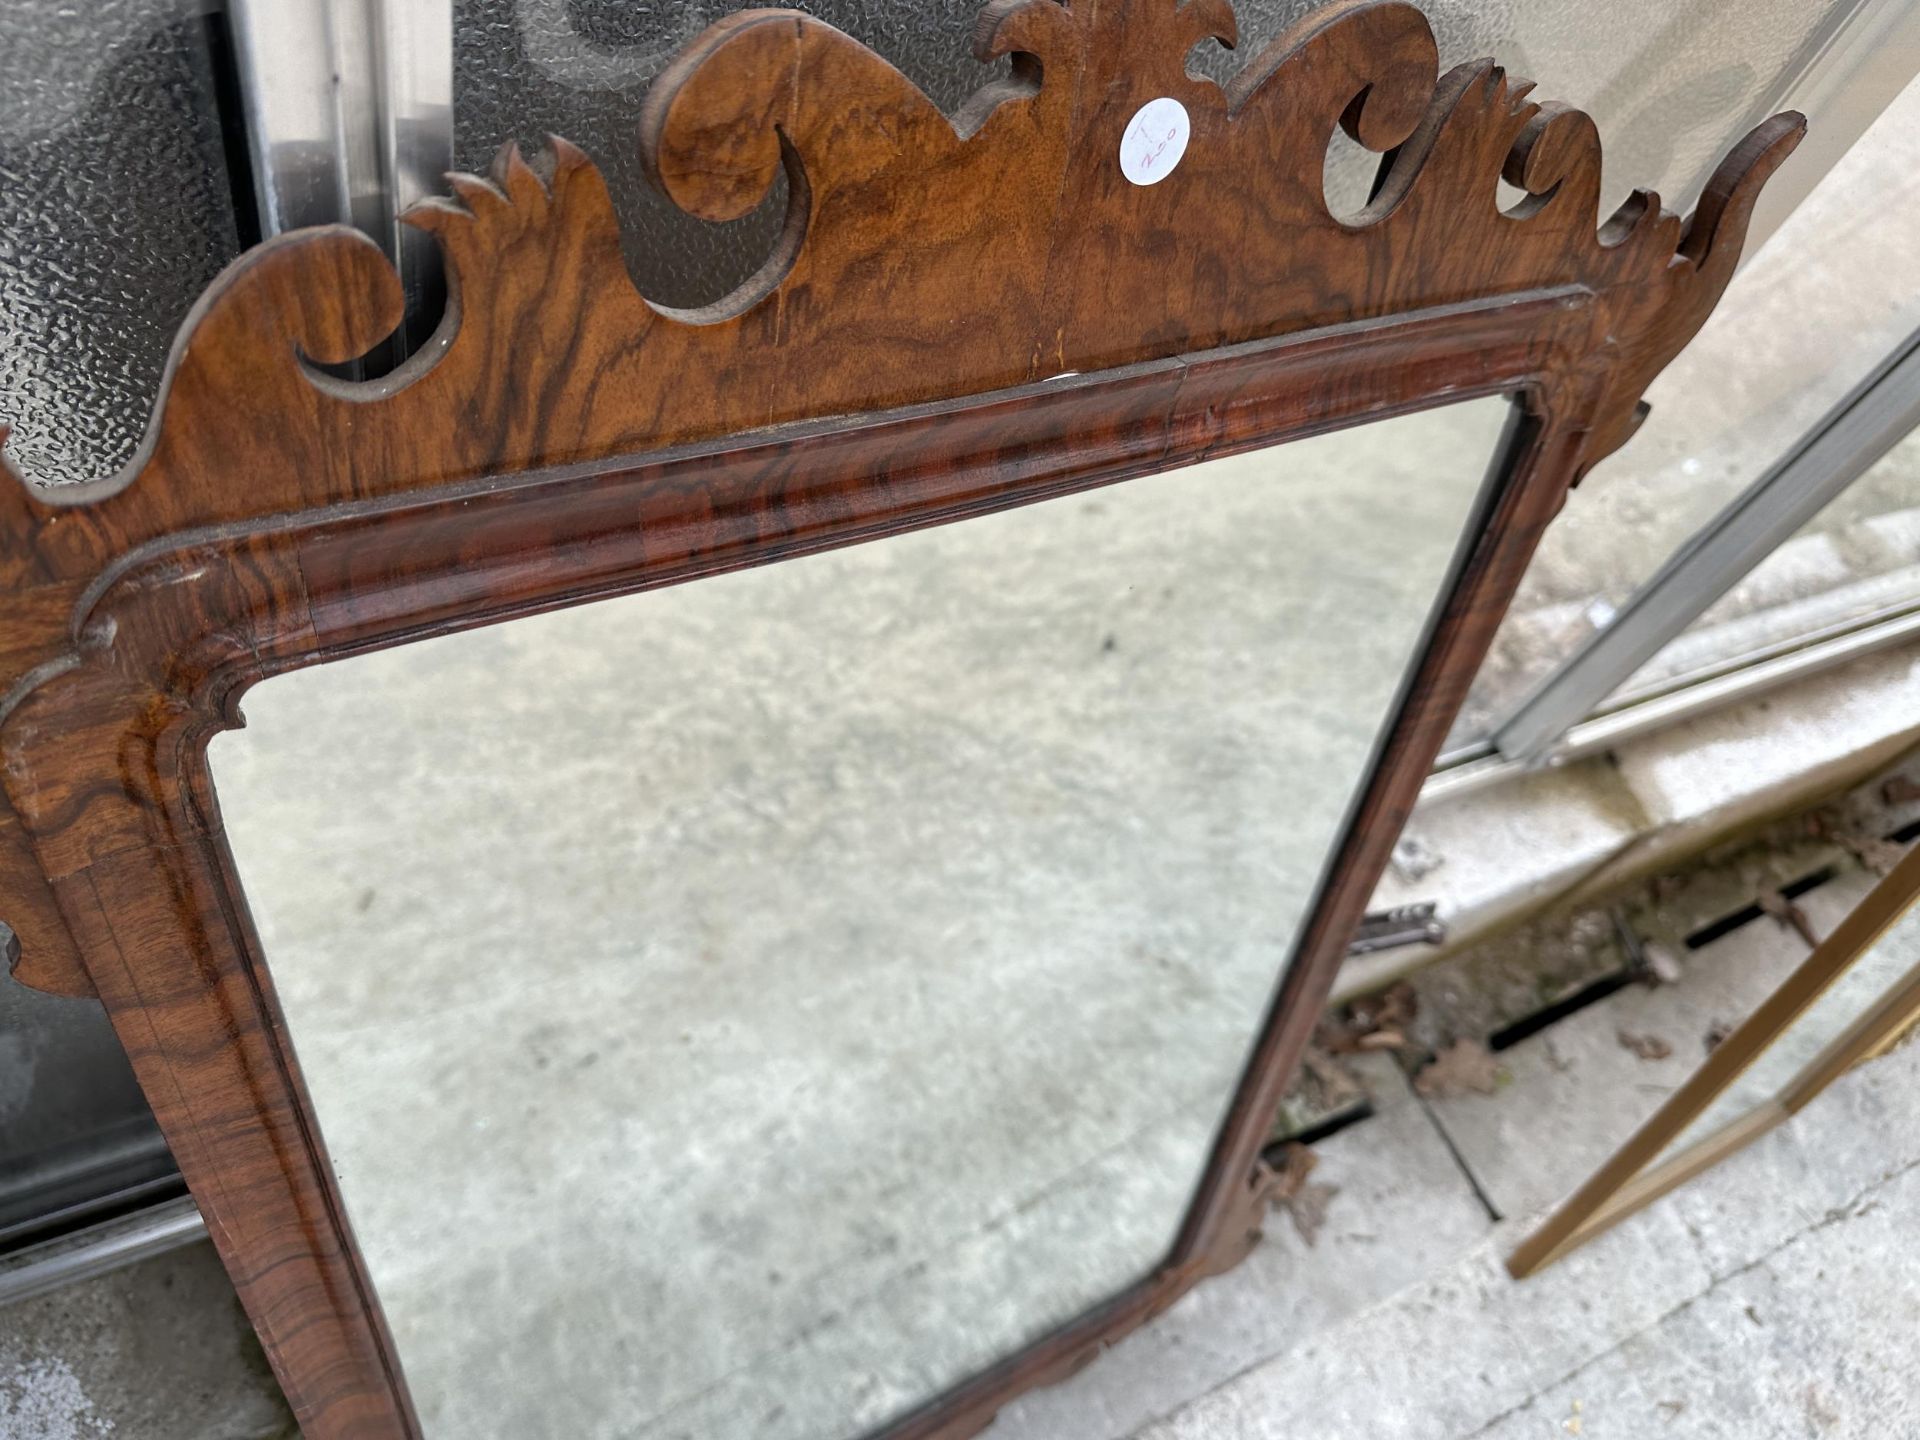 TWO DECORATIVE WALL MIRRORS - ONE OAK, ONE MAHOGANY - Image 3 of 3